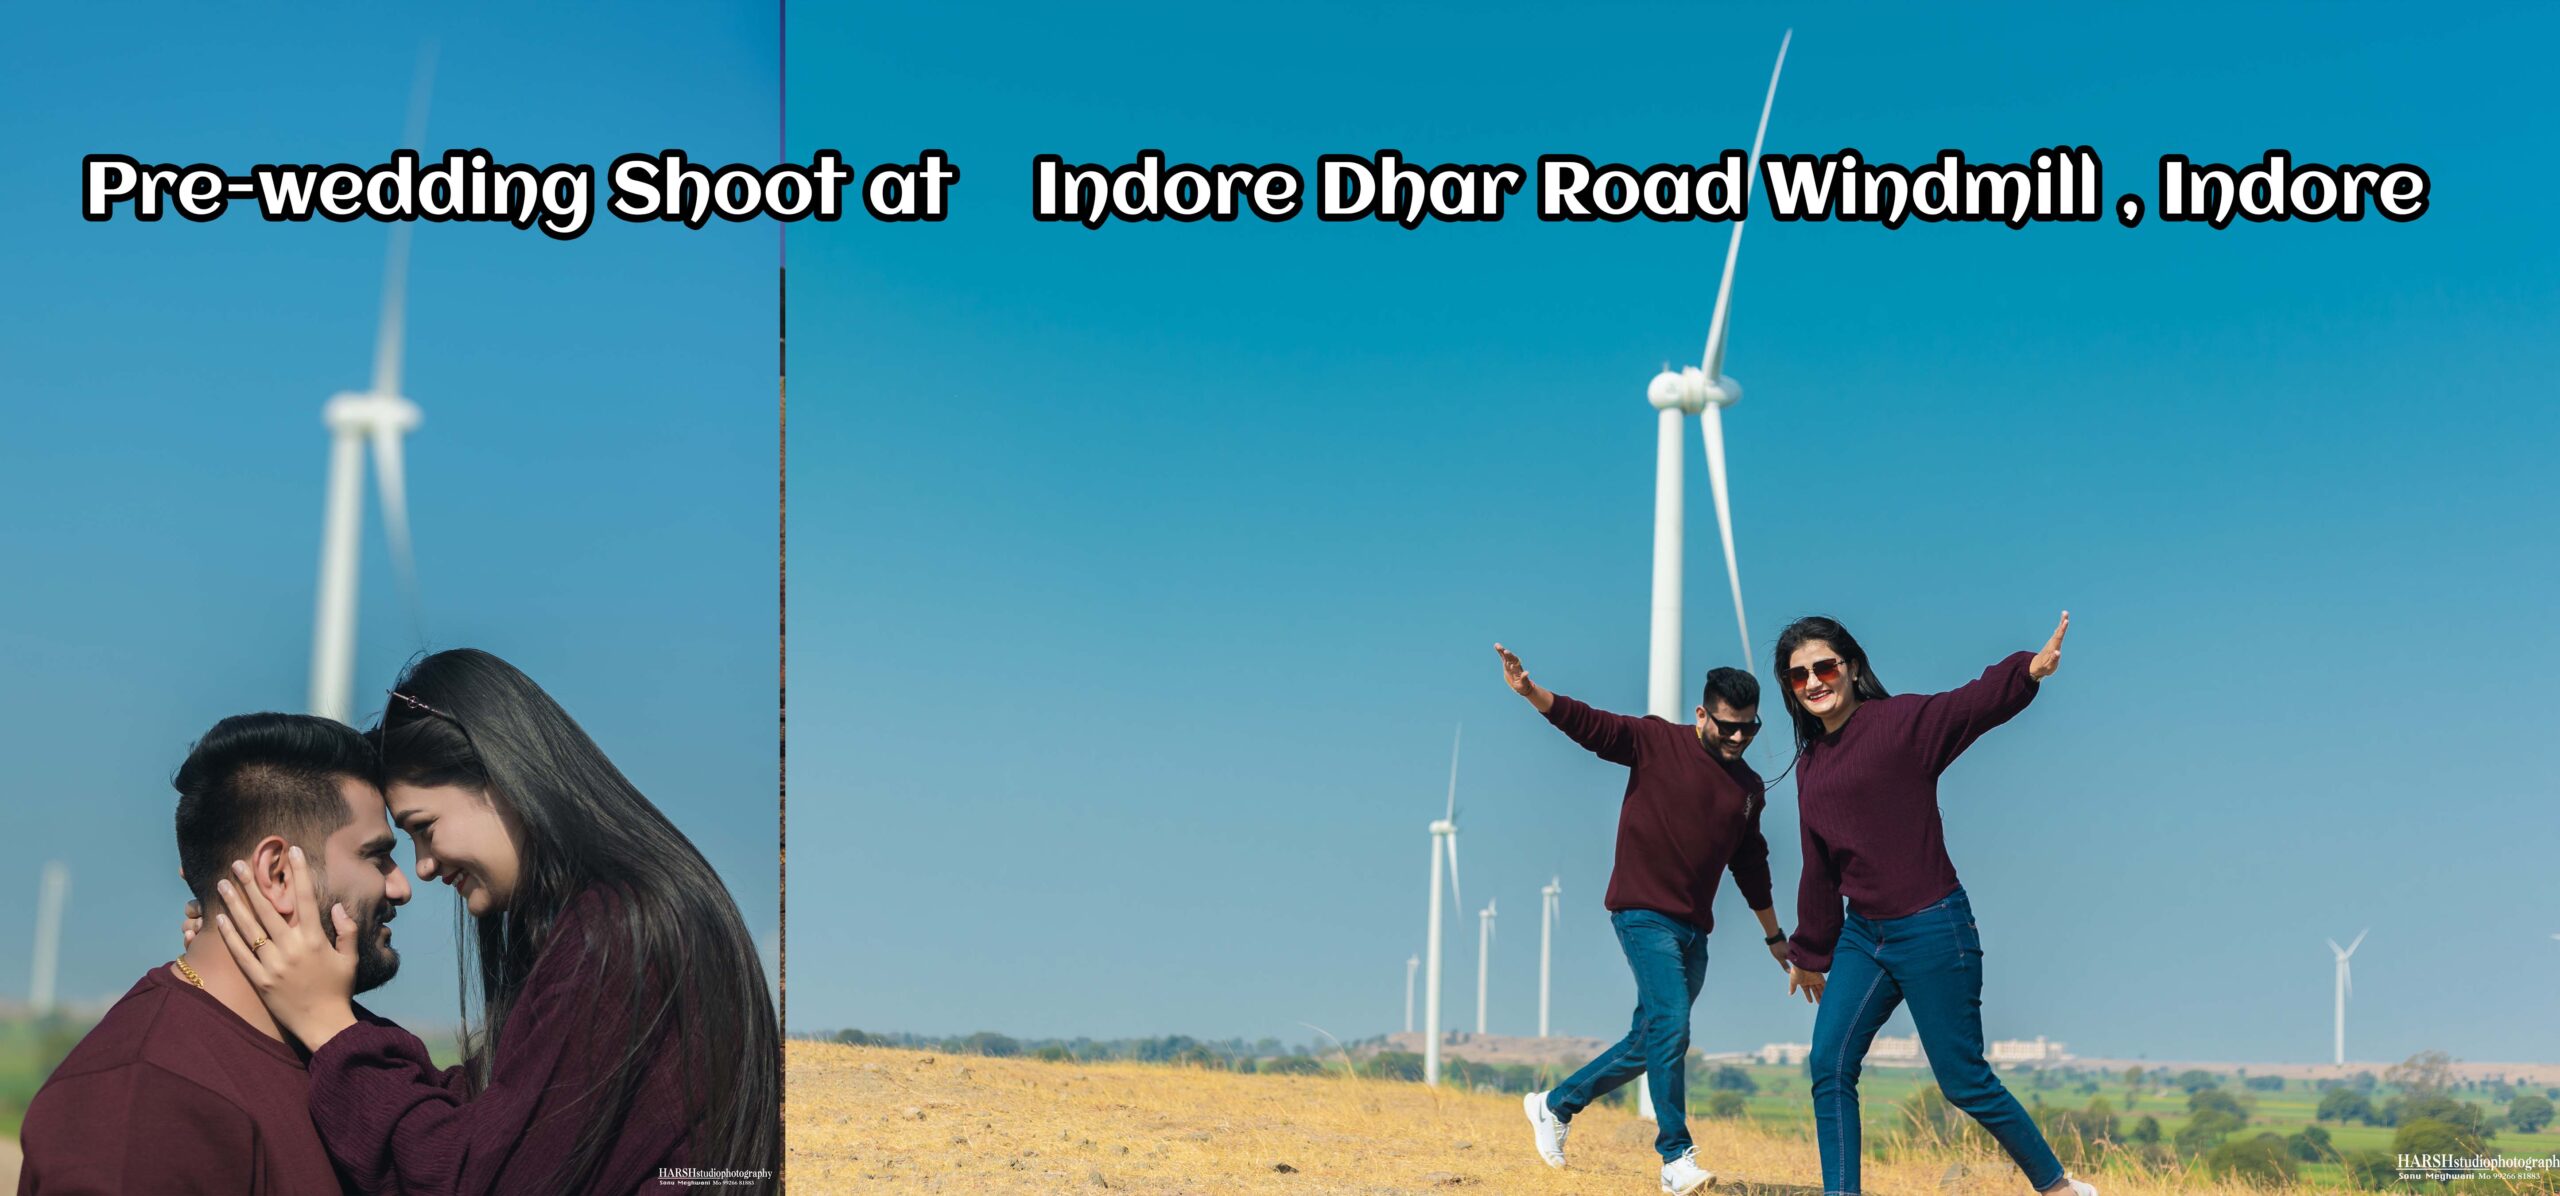 Pre-wedding shoot at Windmill on Indore Dhar Road, Indore, India, featuring a couple with wind turbines in the background, captured by Harsh Studio Photography.